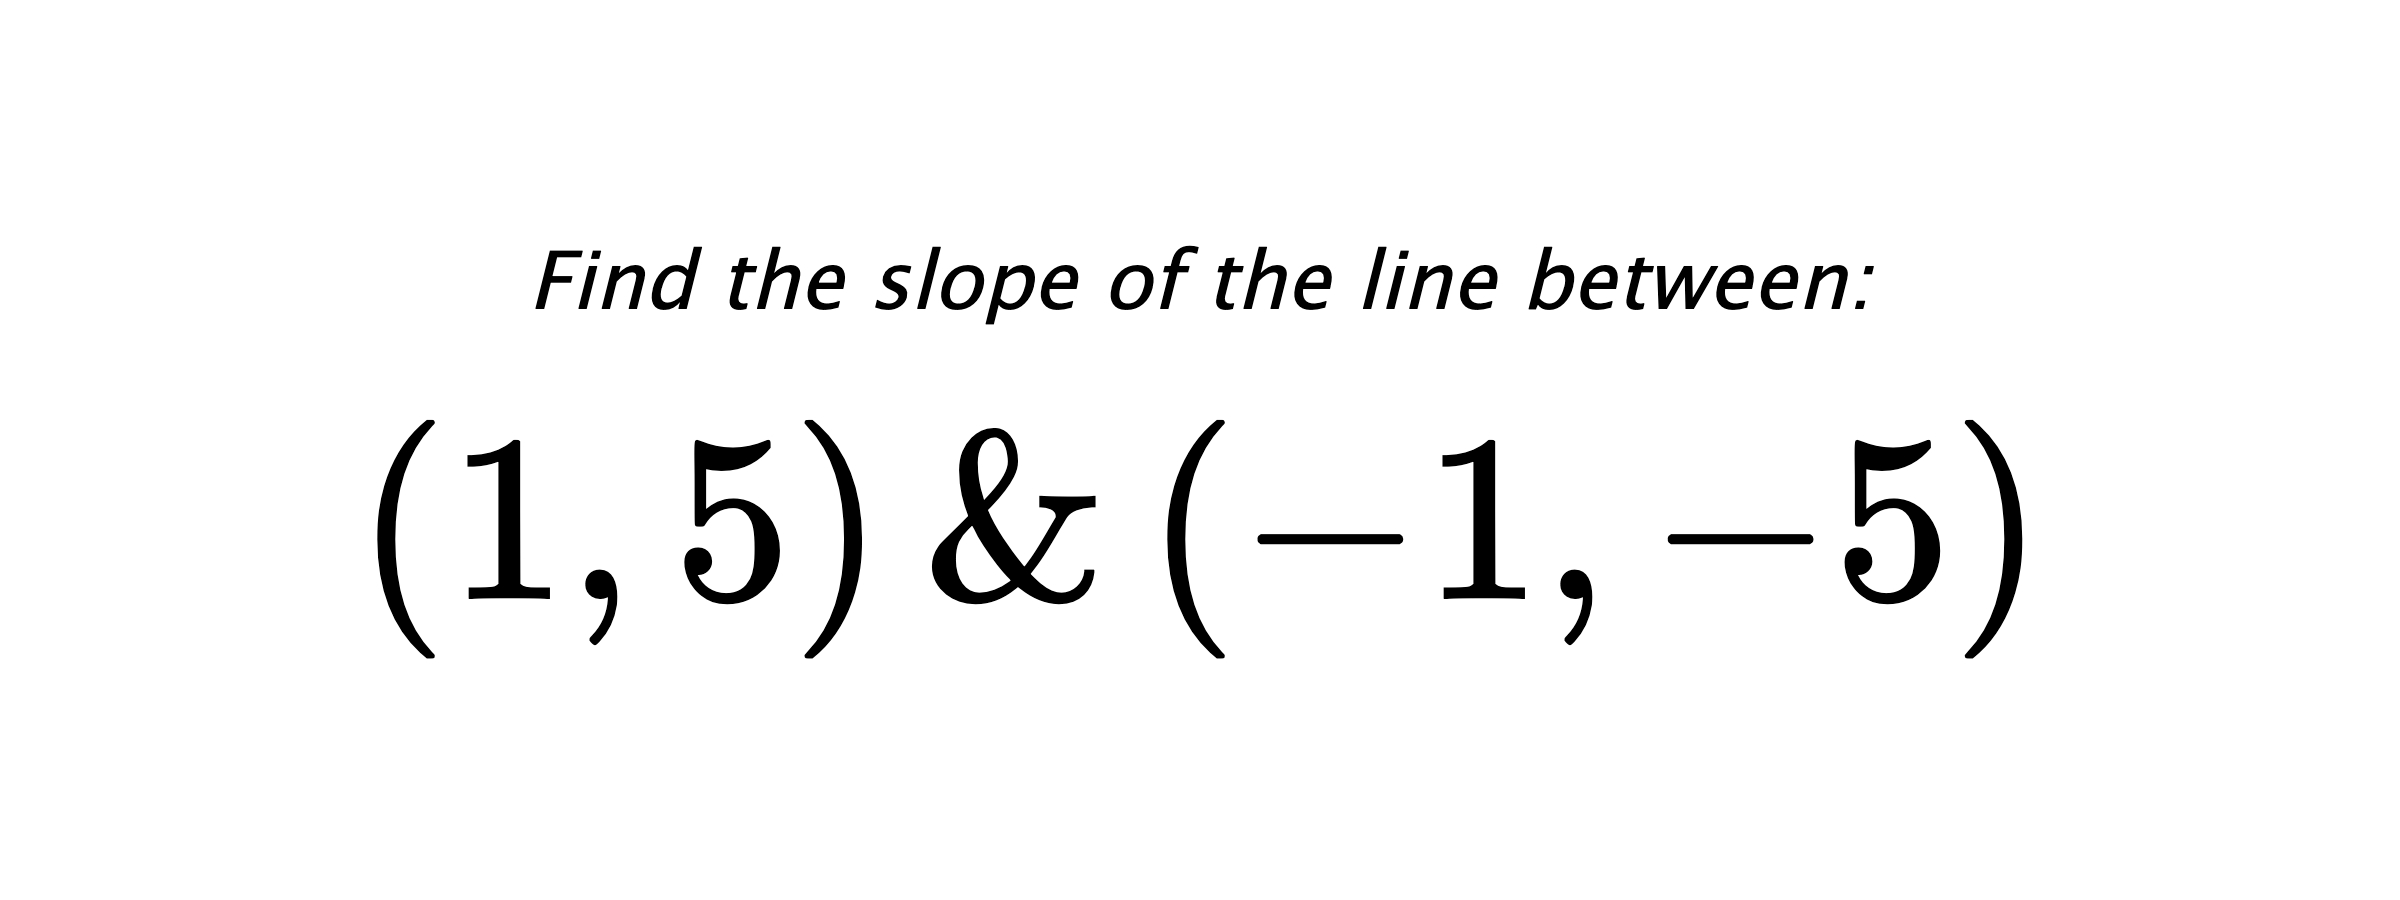 Find the slope of the line between: $ (1,5) \hspace{0.5cm} \text{&} \hspace{0.5cm} (-1,-5) $